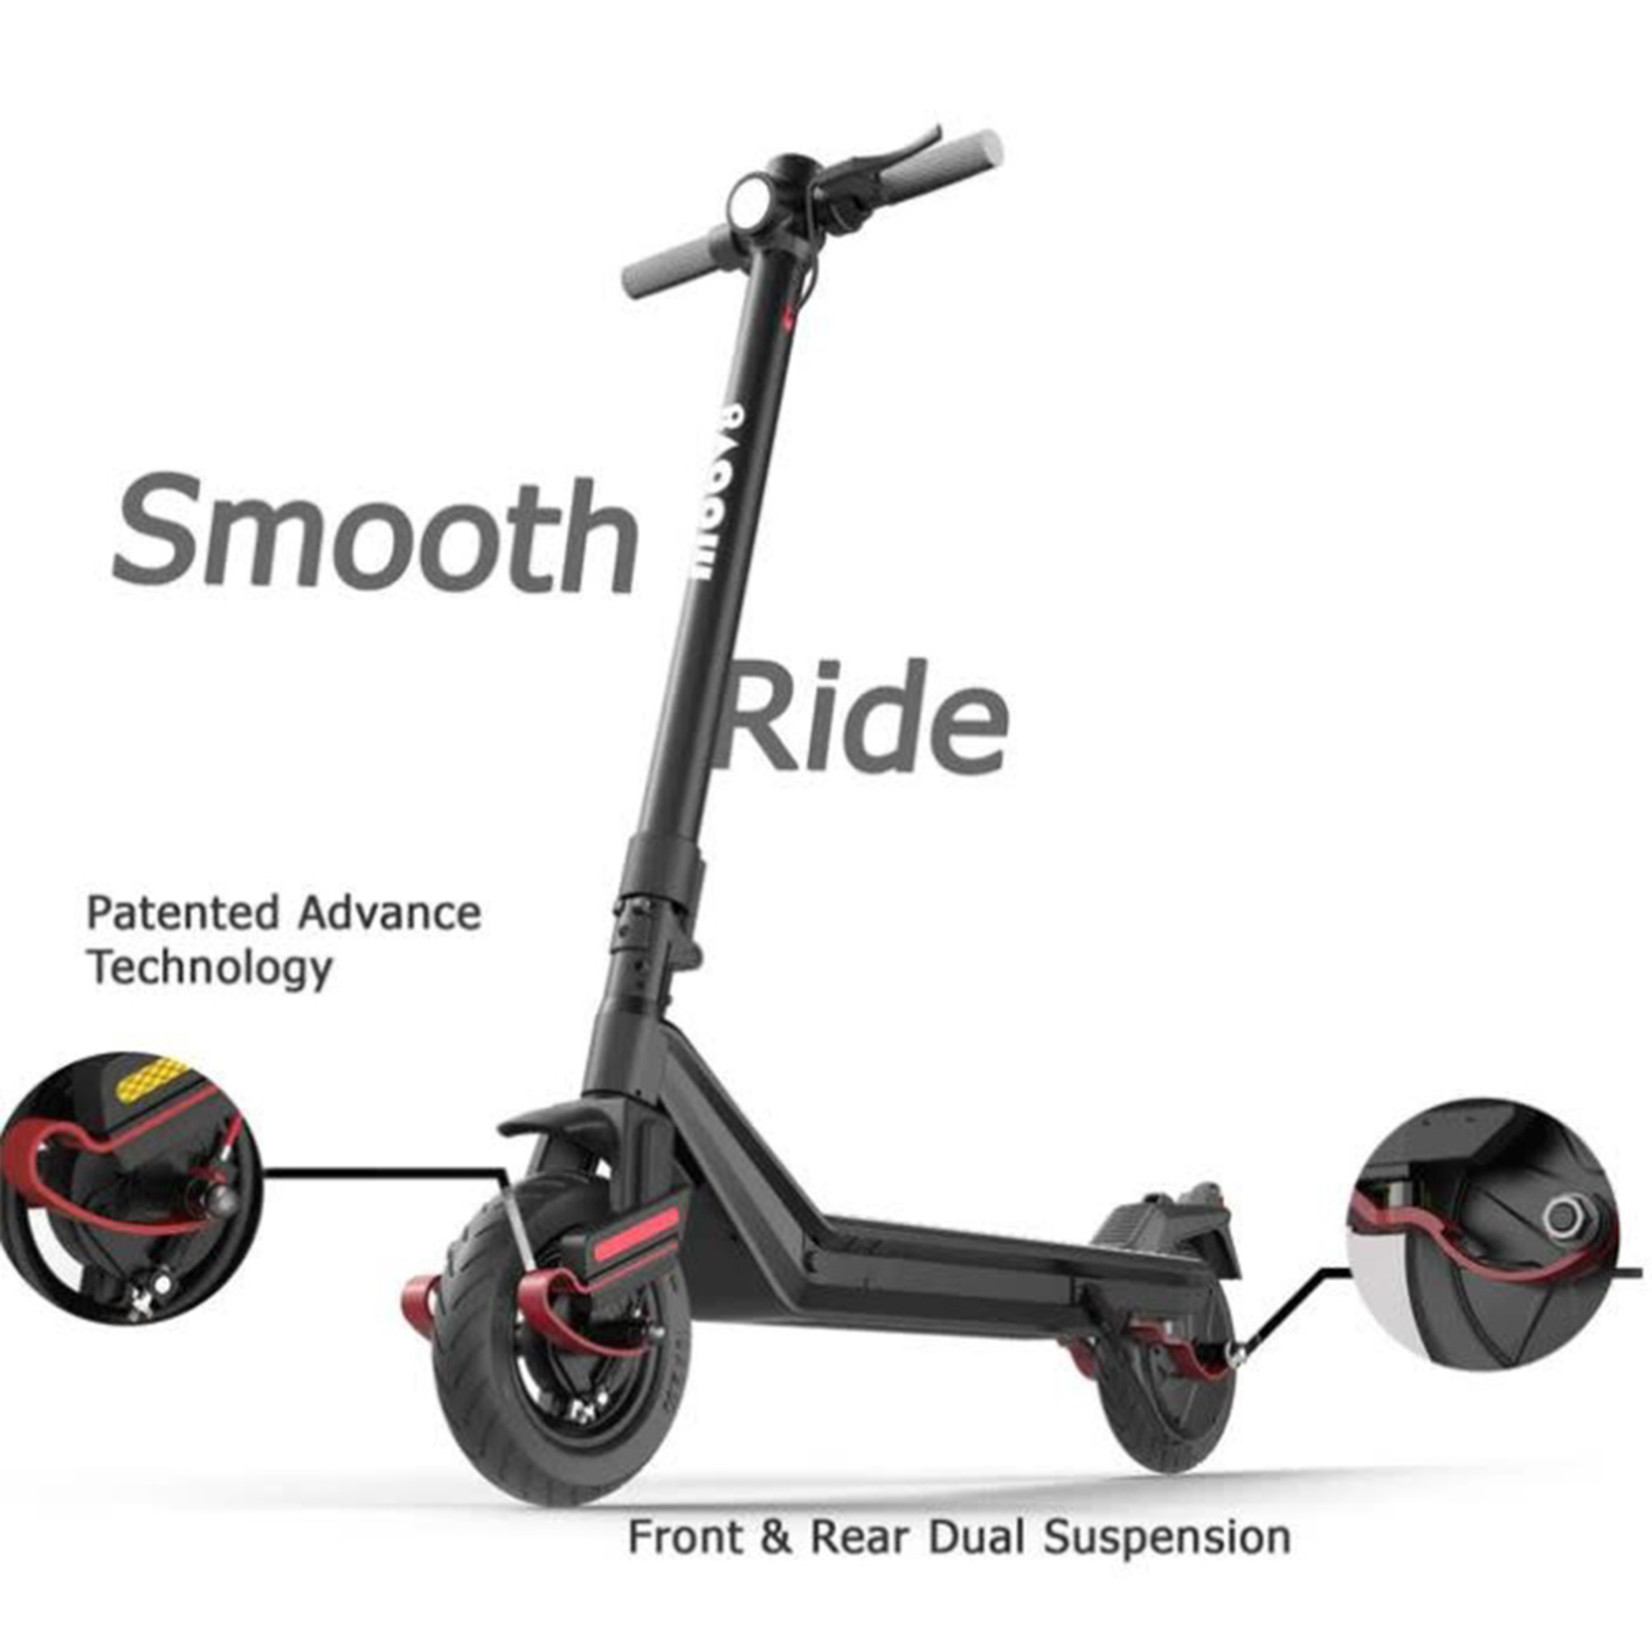 Moov8 Moov8 S1 eScooter Long Deck, Powerful Motor Dual Suspension Electric Scooter